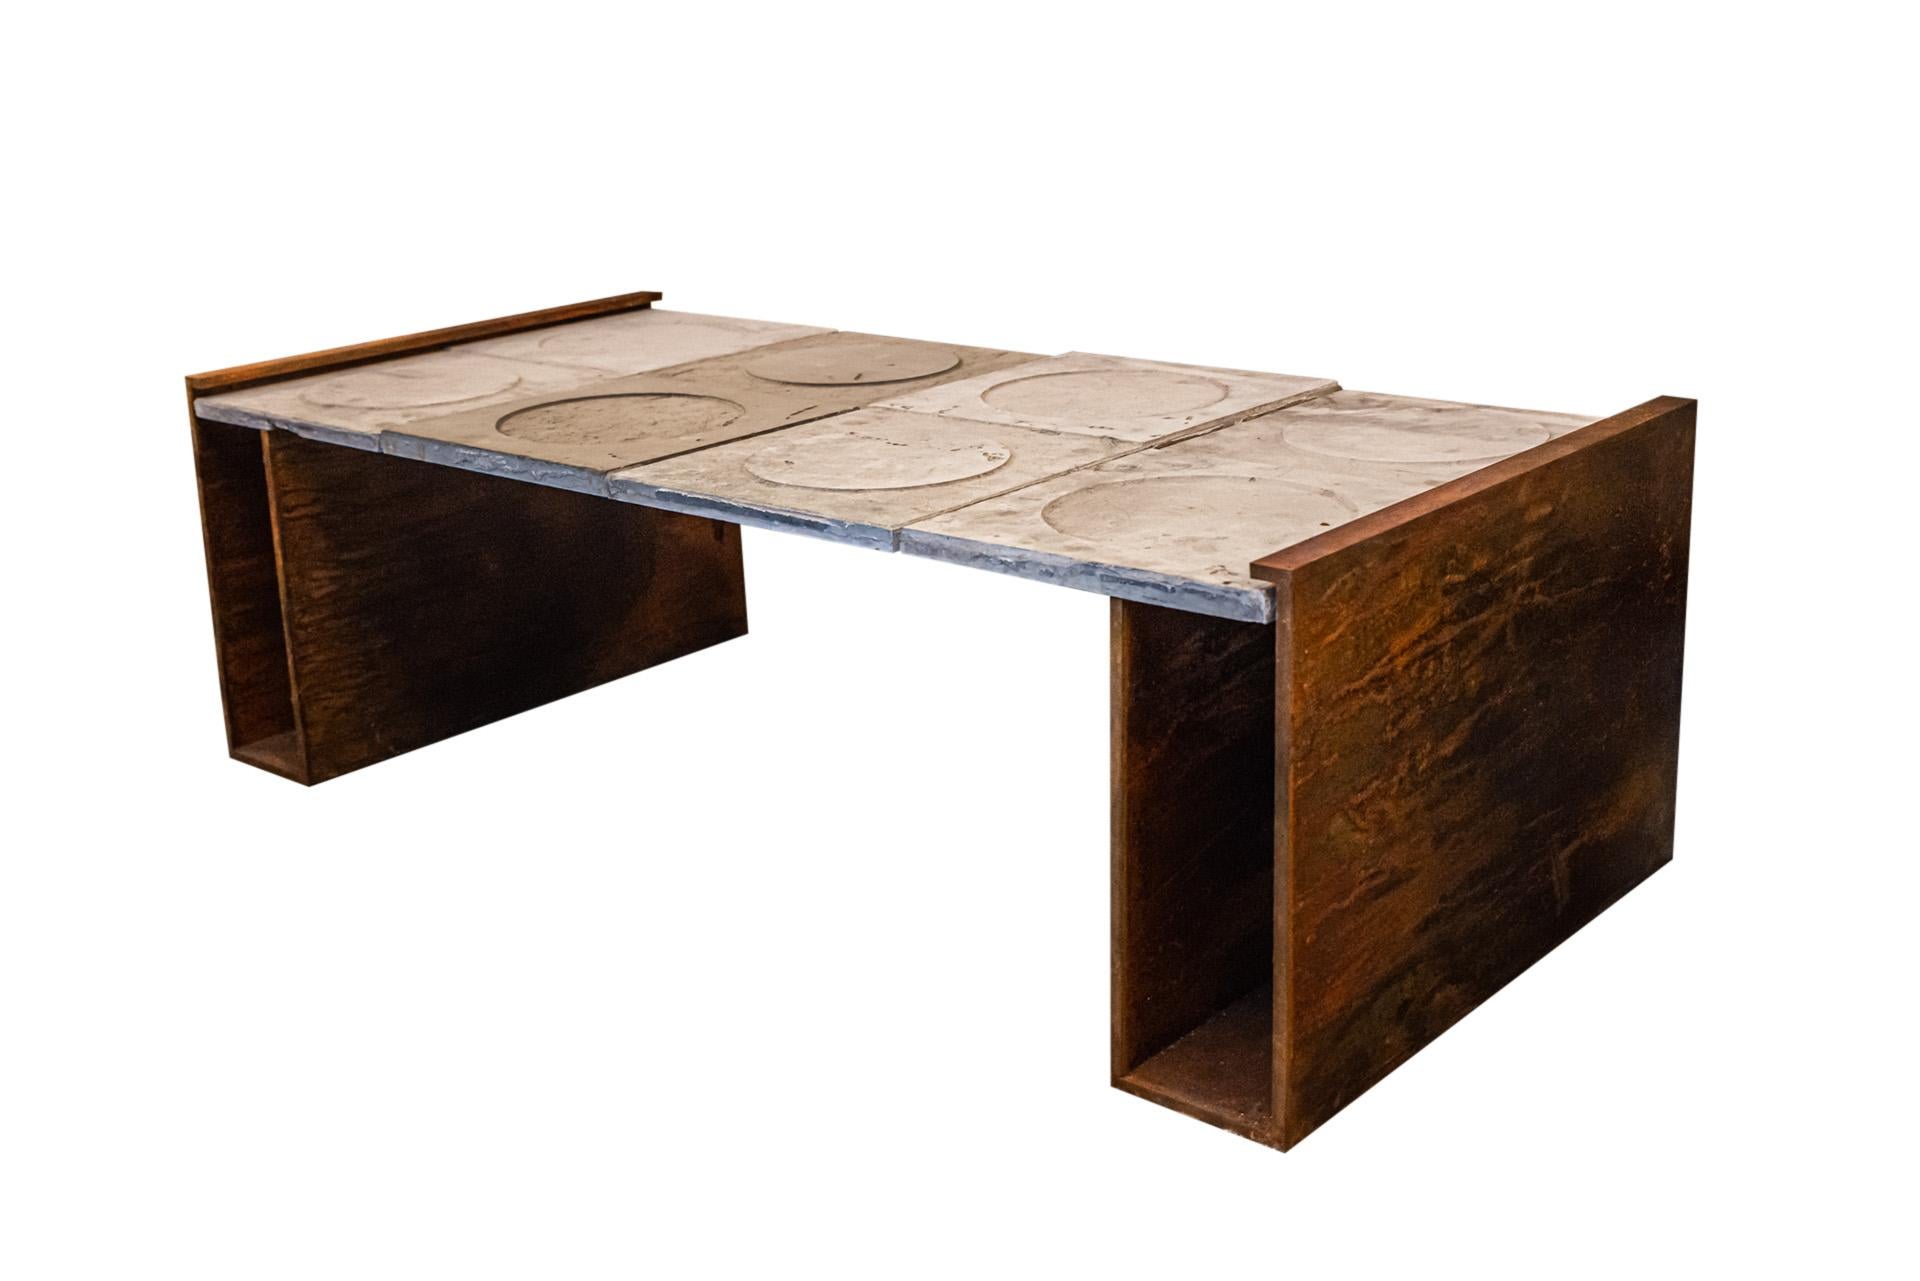 Coffee table composed of four elements in Roman travertine,
